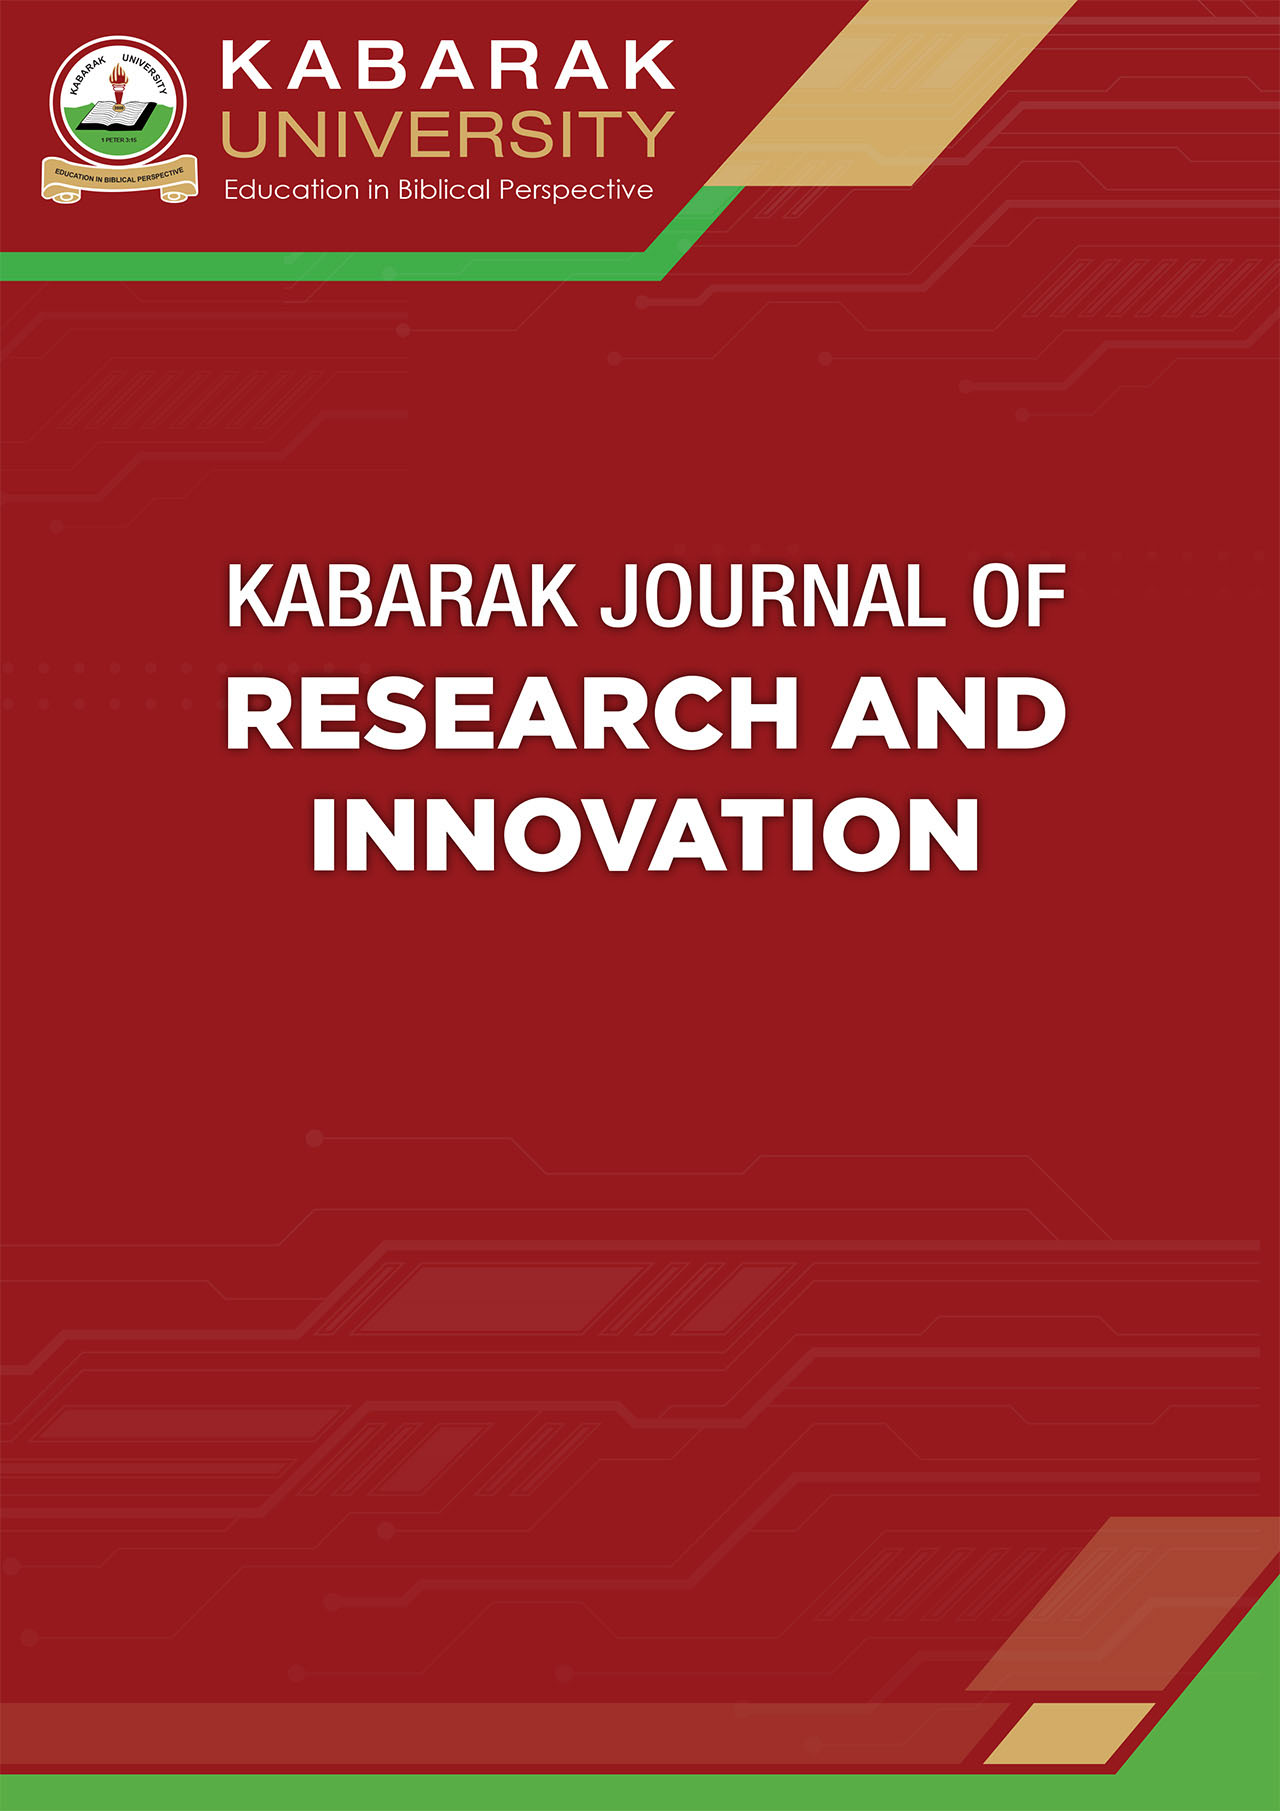 					View Vol. 5 No. 2 (2018): Kabarak Journal of Research and Innovation (KJRI)
				